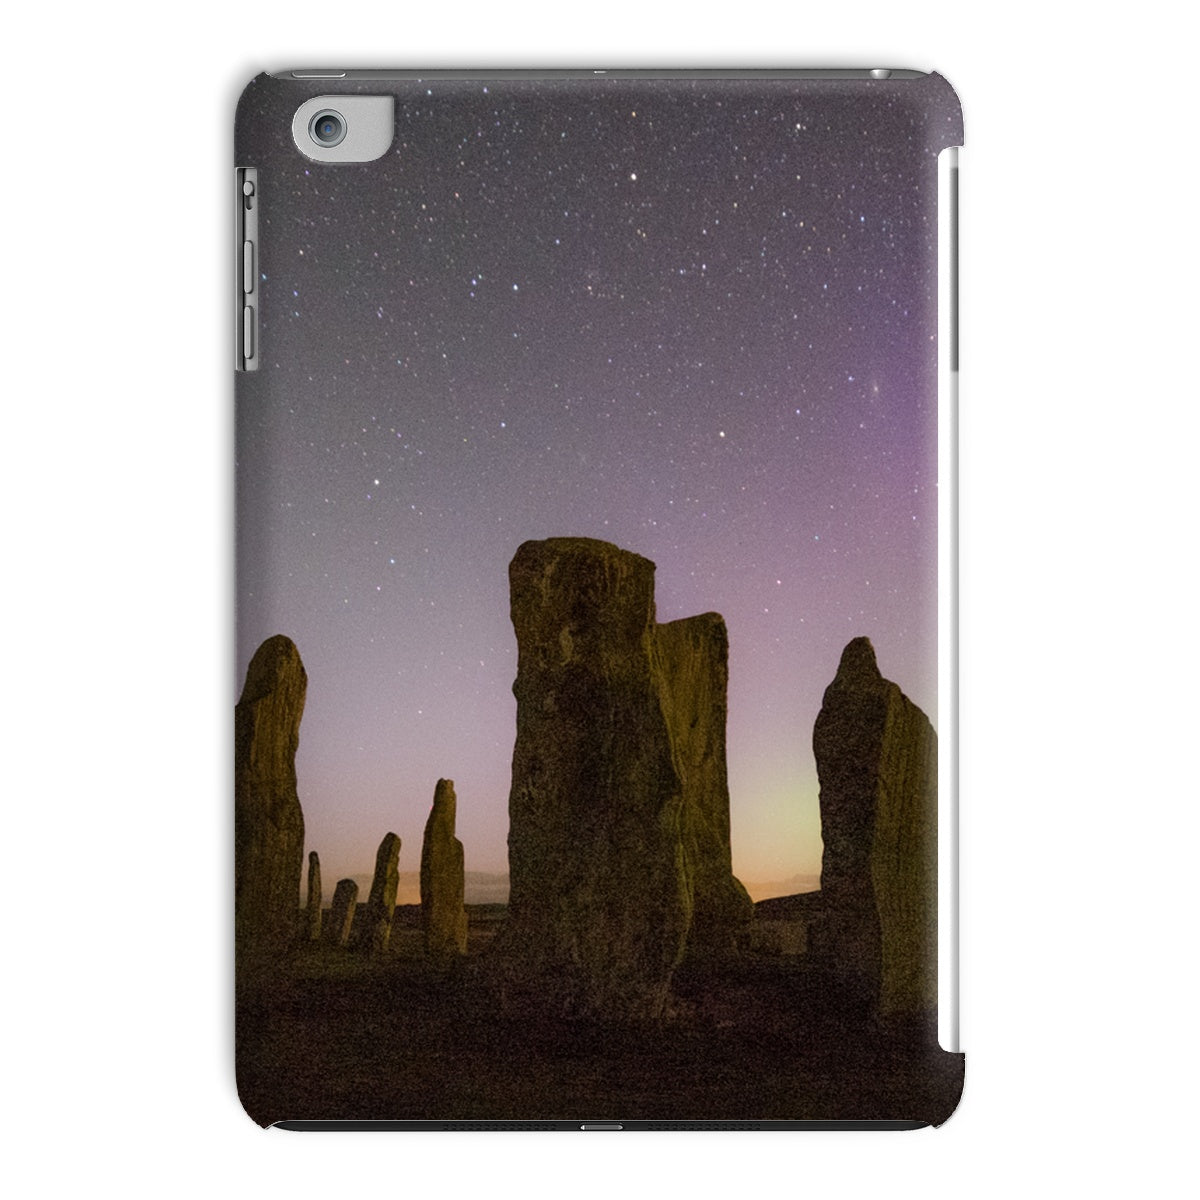 Callanish, Zodiacal light and Aurora Tablet Cases